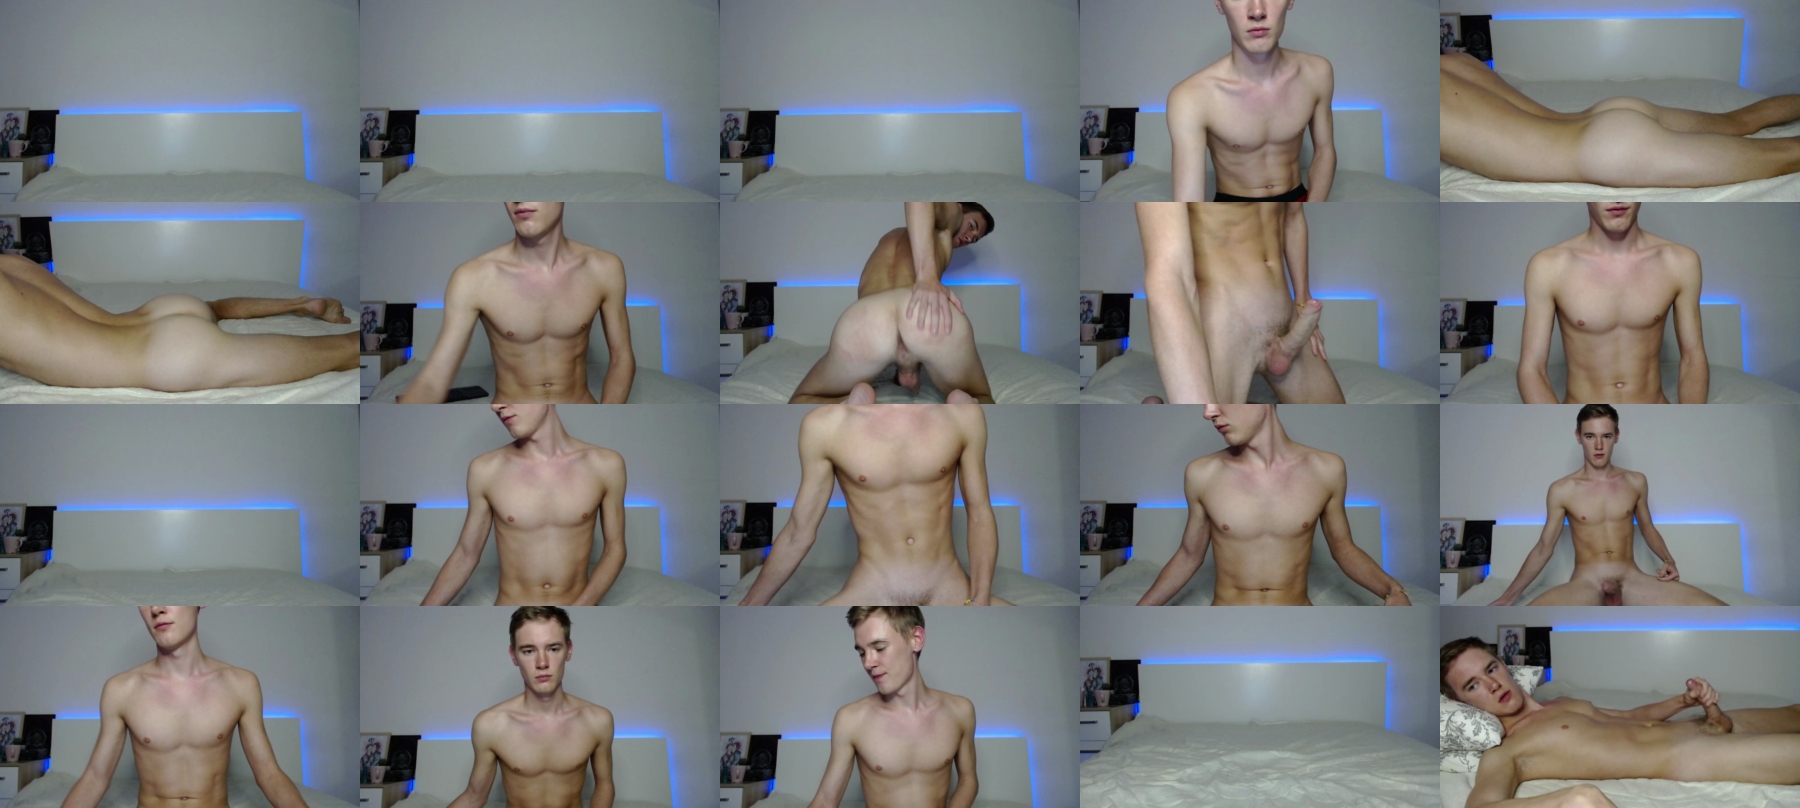 Conortwink  08-09-2021 video worship